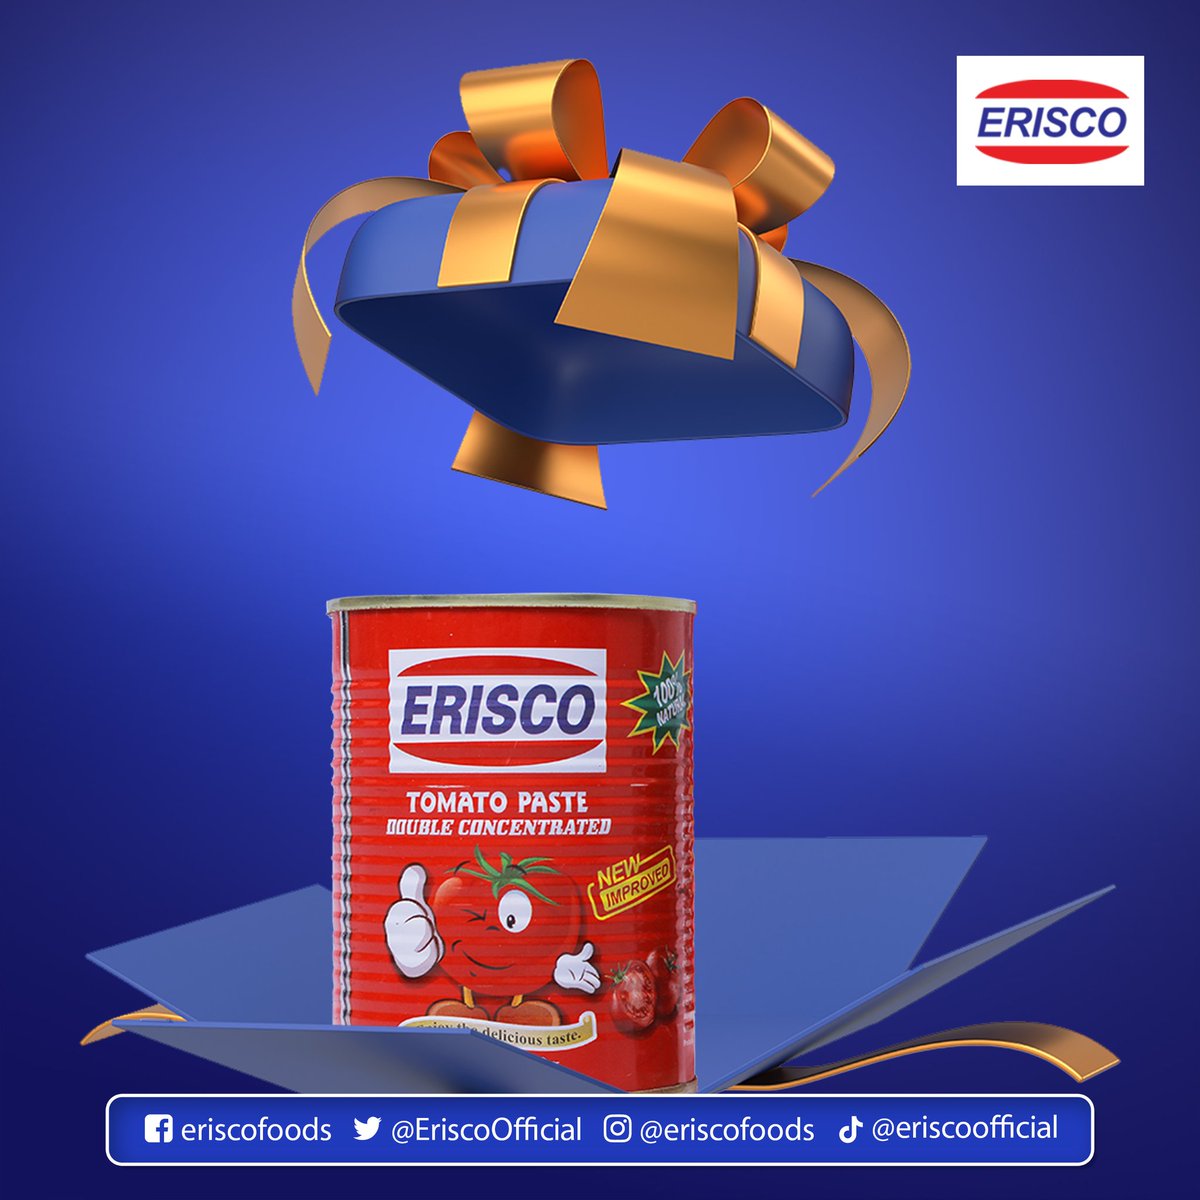 Erisco Tomato Paste is the secret ingredient for meals that leaves a lasting impression on everyone's taste buds at your dinner table.
#GiftOfLove #eastertreats #healthyfoodchoices